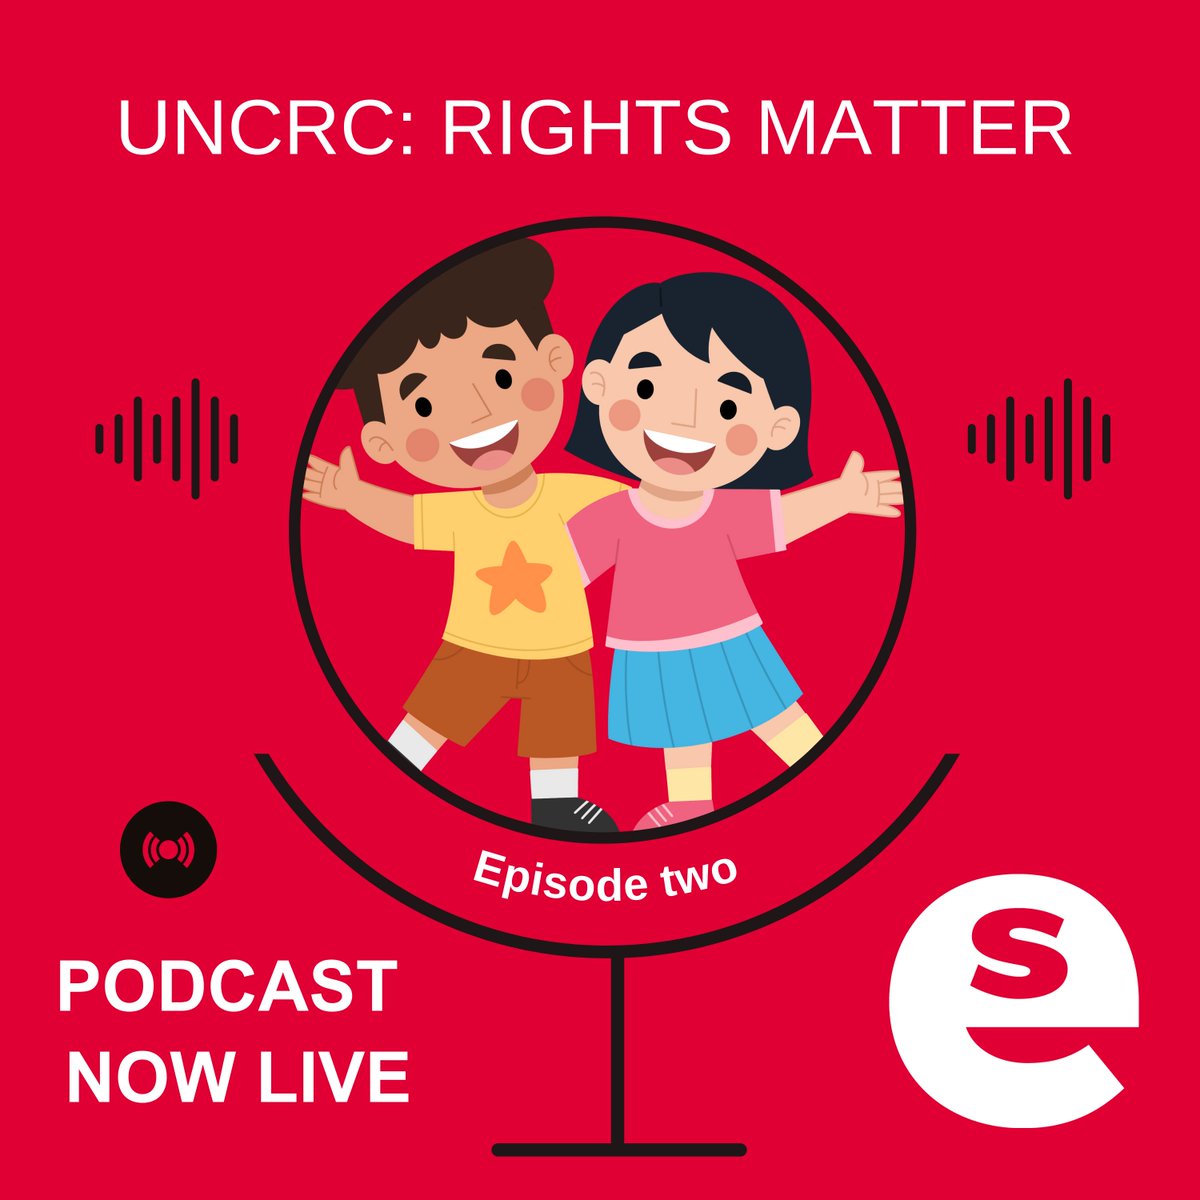 It's Friday which means our latest podcast episode is now live! We are delighted to bring you the second in our series of UNCRC podcasts where we are talking about Rights and STEM. Listen now: podbean.com/ew/pb-rhan7-14…